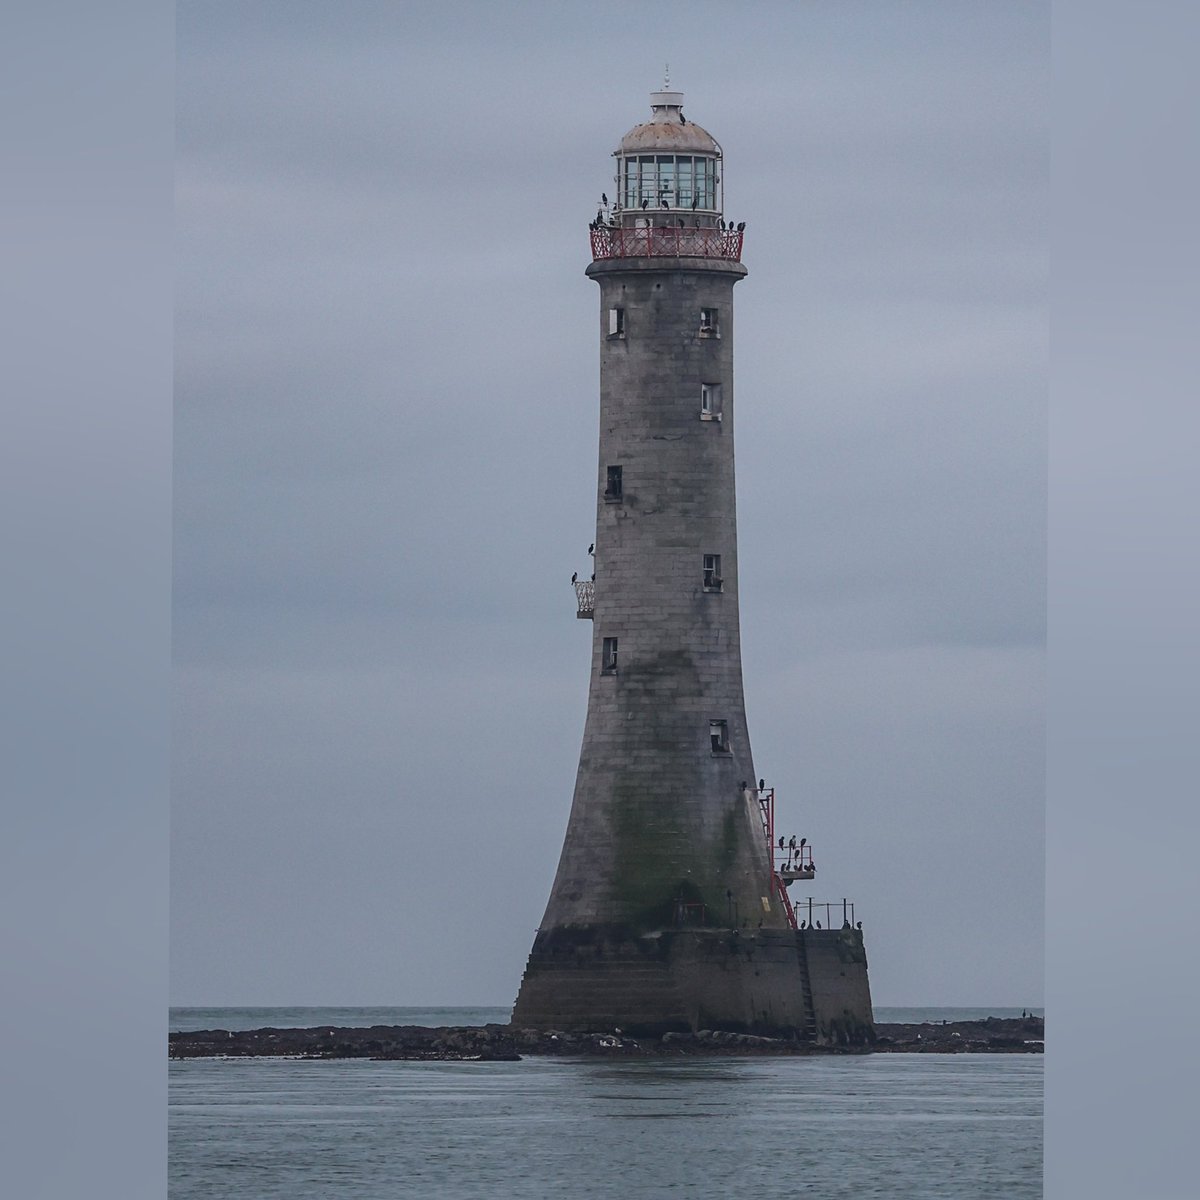 Haulbowline Lighthouse - standing tall on Carlingford Lough and celebrating 200 years this year.